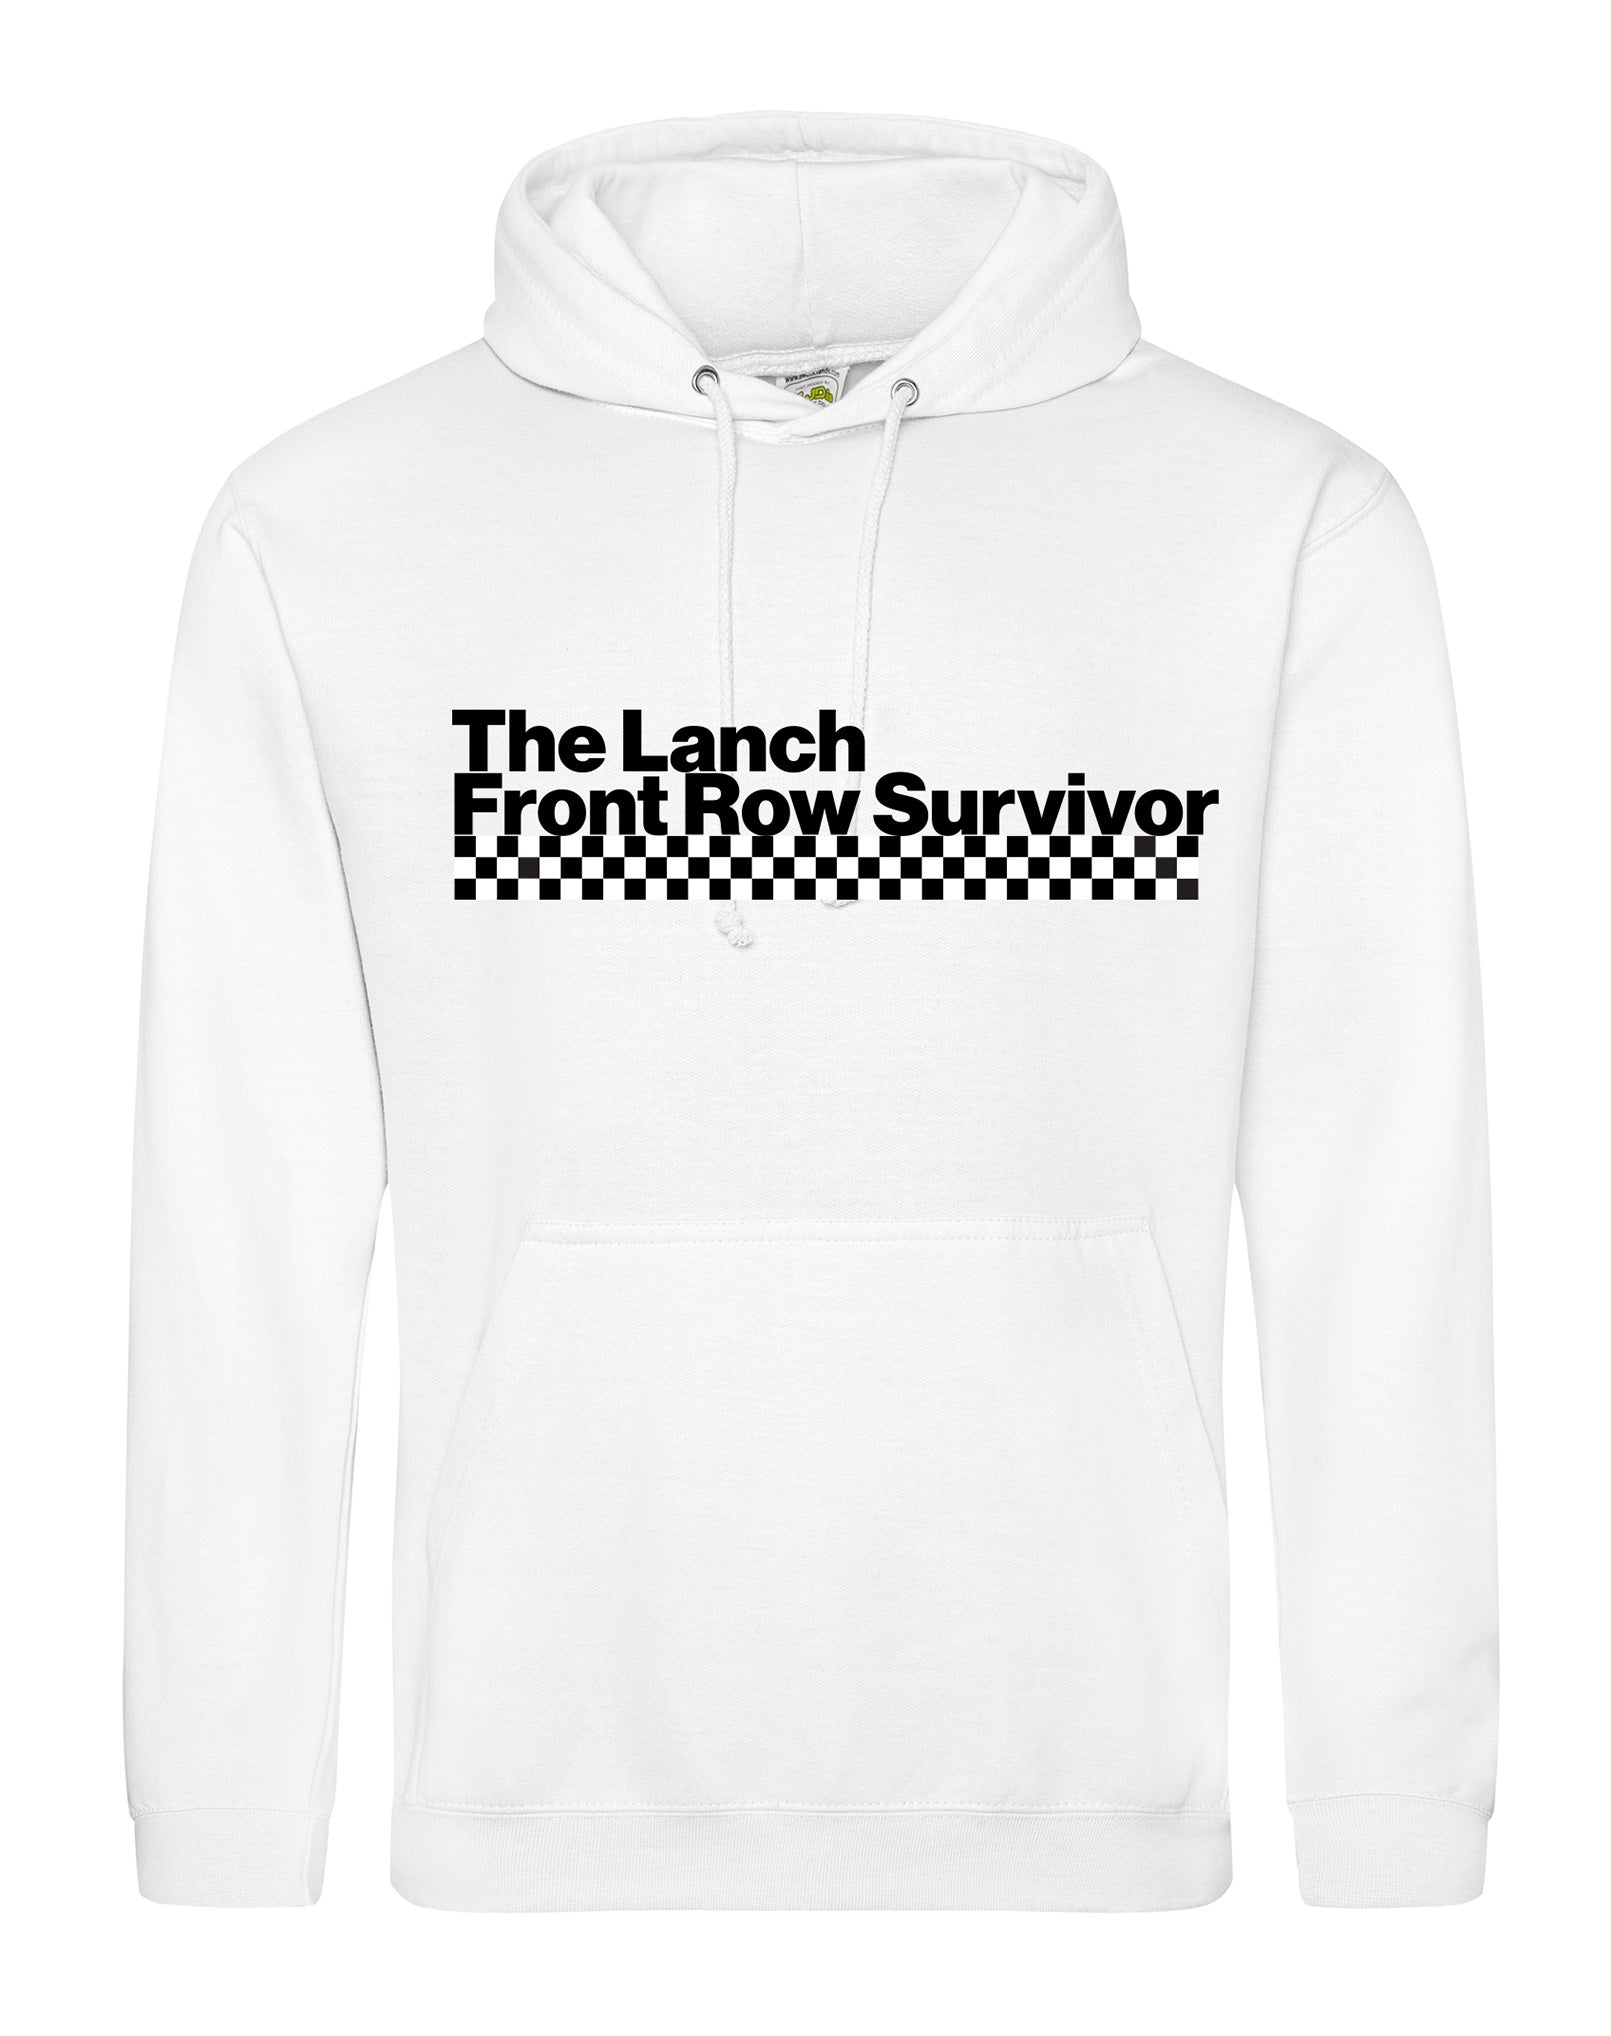 The Lanch - Front Row Survivor - unisex fit hoodie - various colours - Dirty Stop Outs